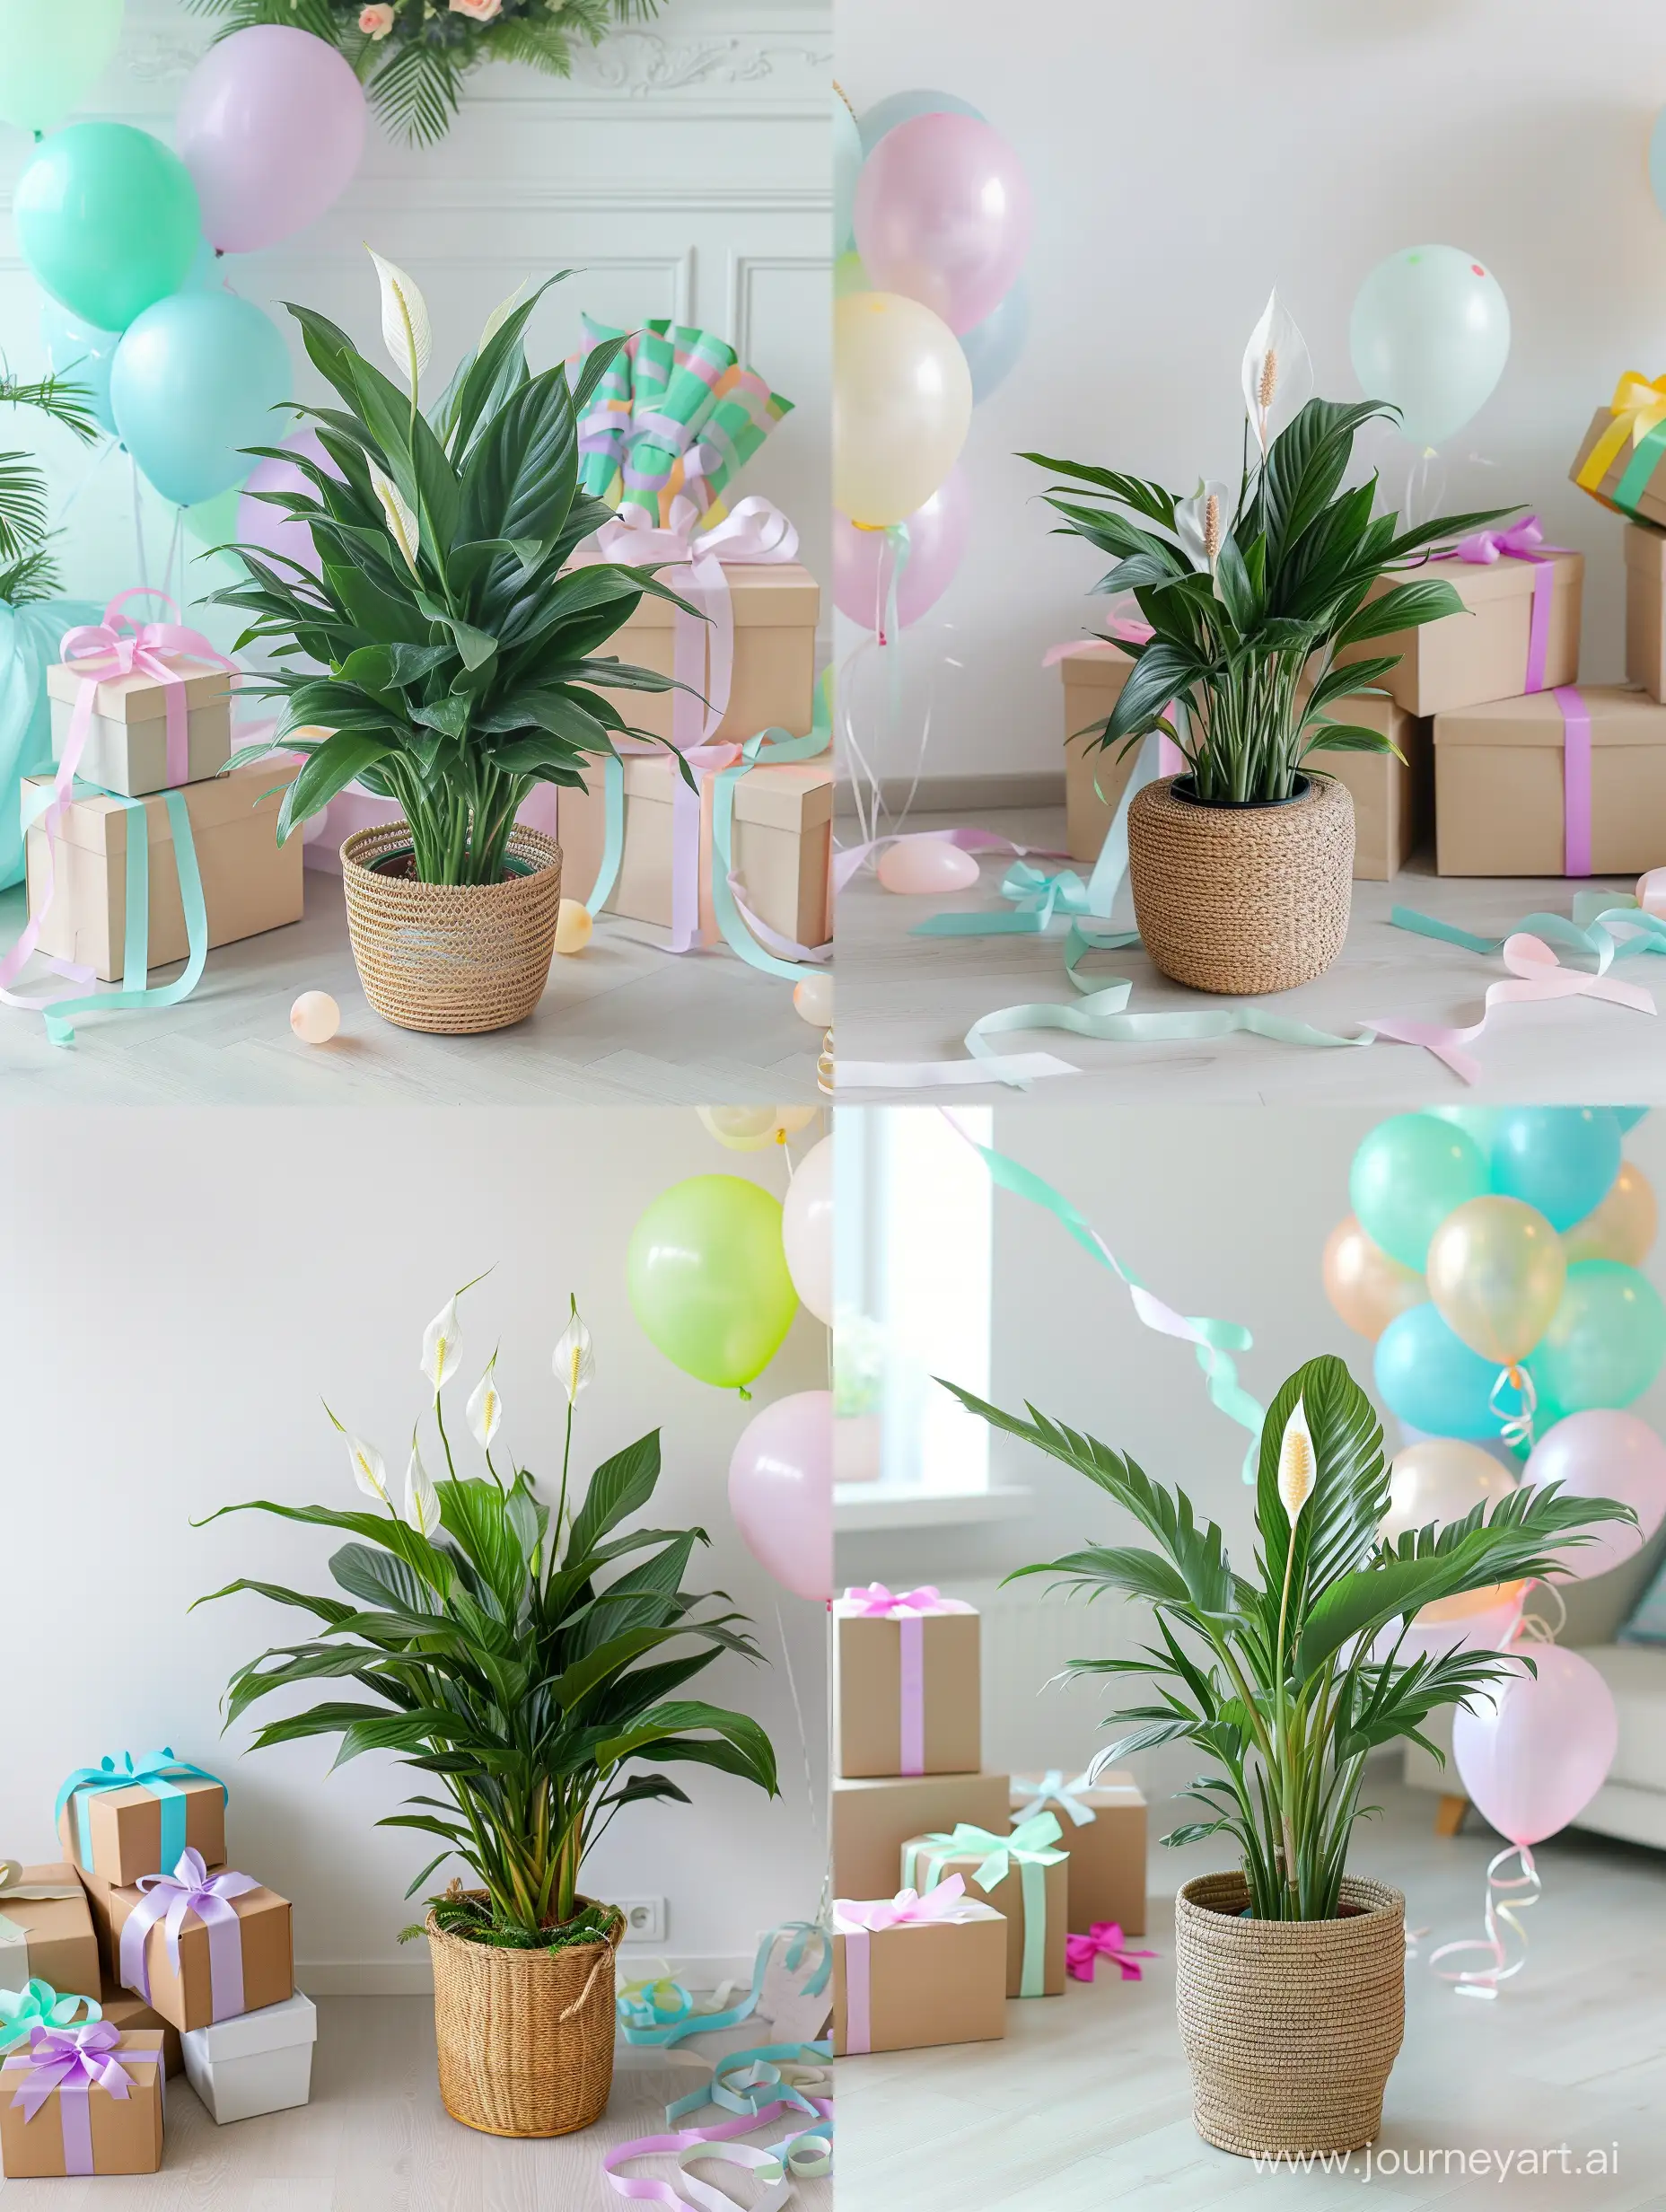 spathiphyllum in a rattan pot stands on the floor, nearby there are boxes with pastel-colored ribbons, pastel-colored balloons, on a white background